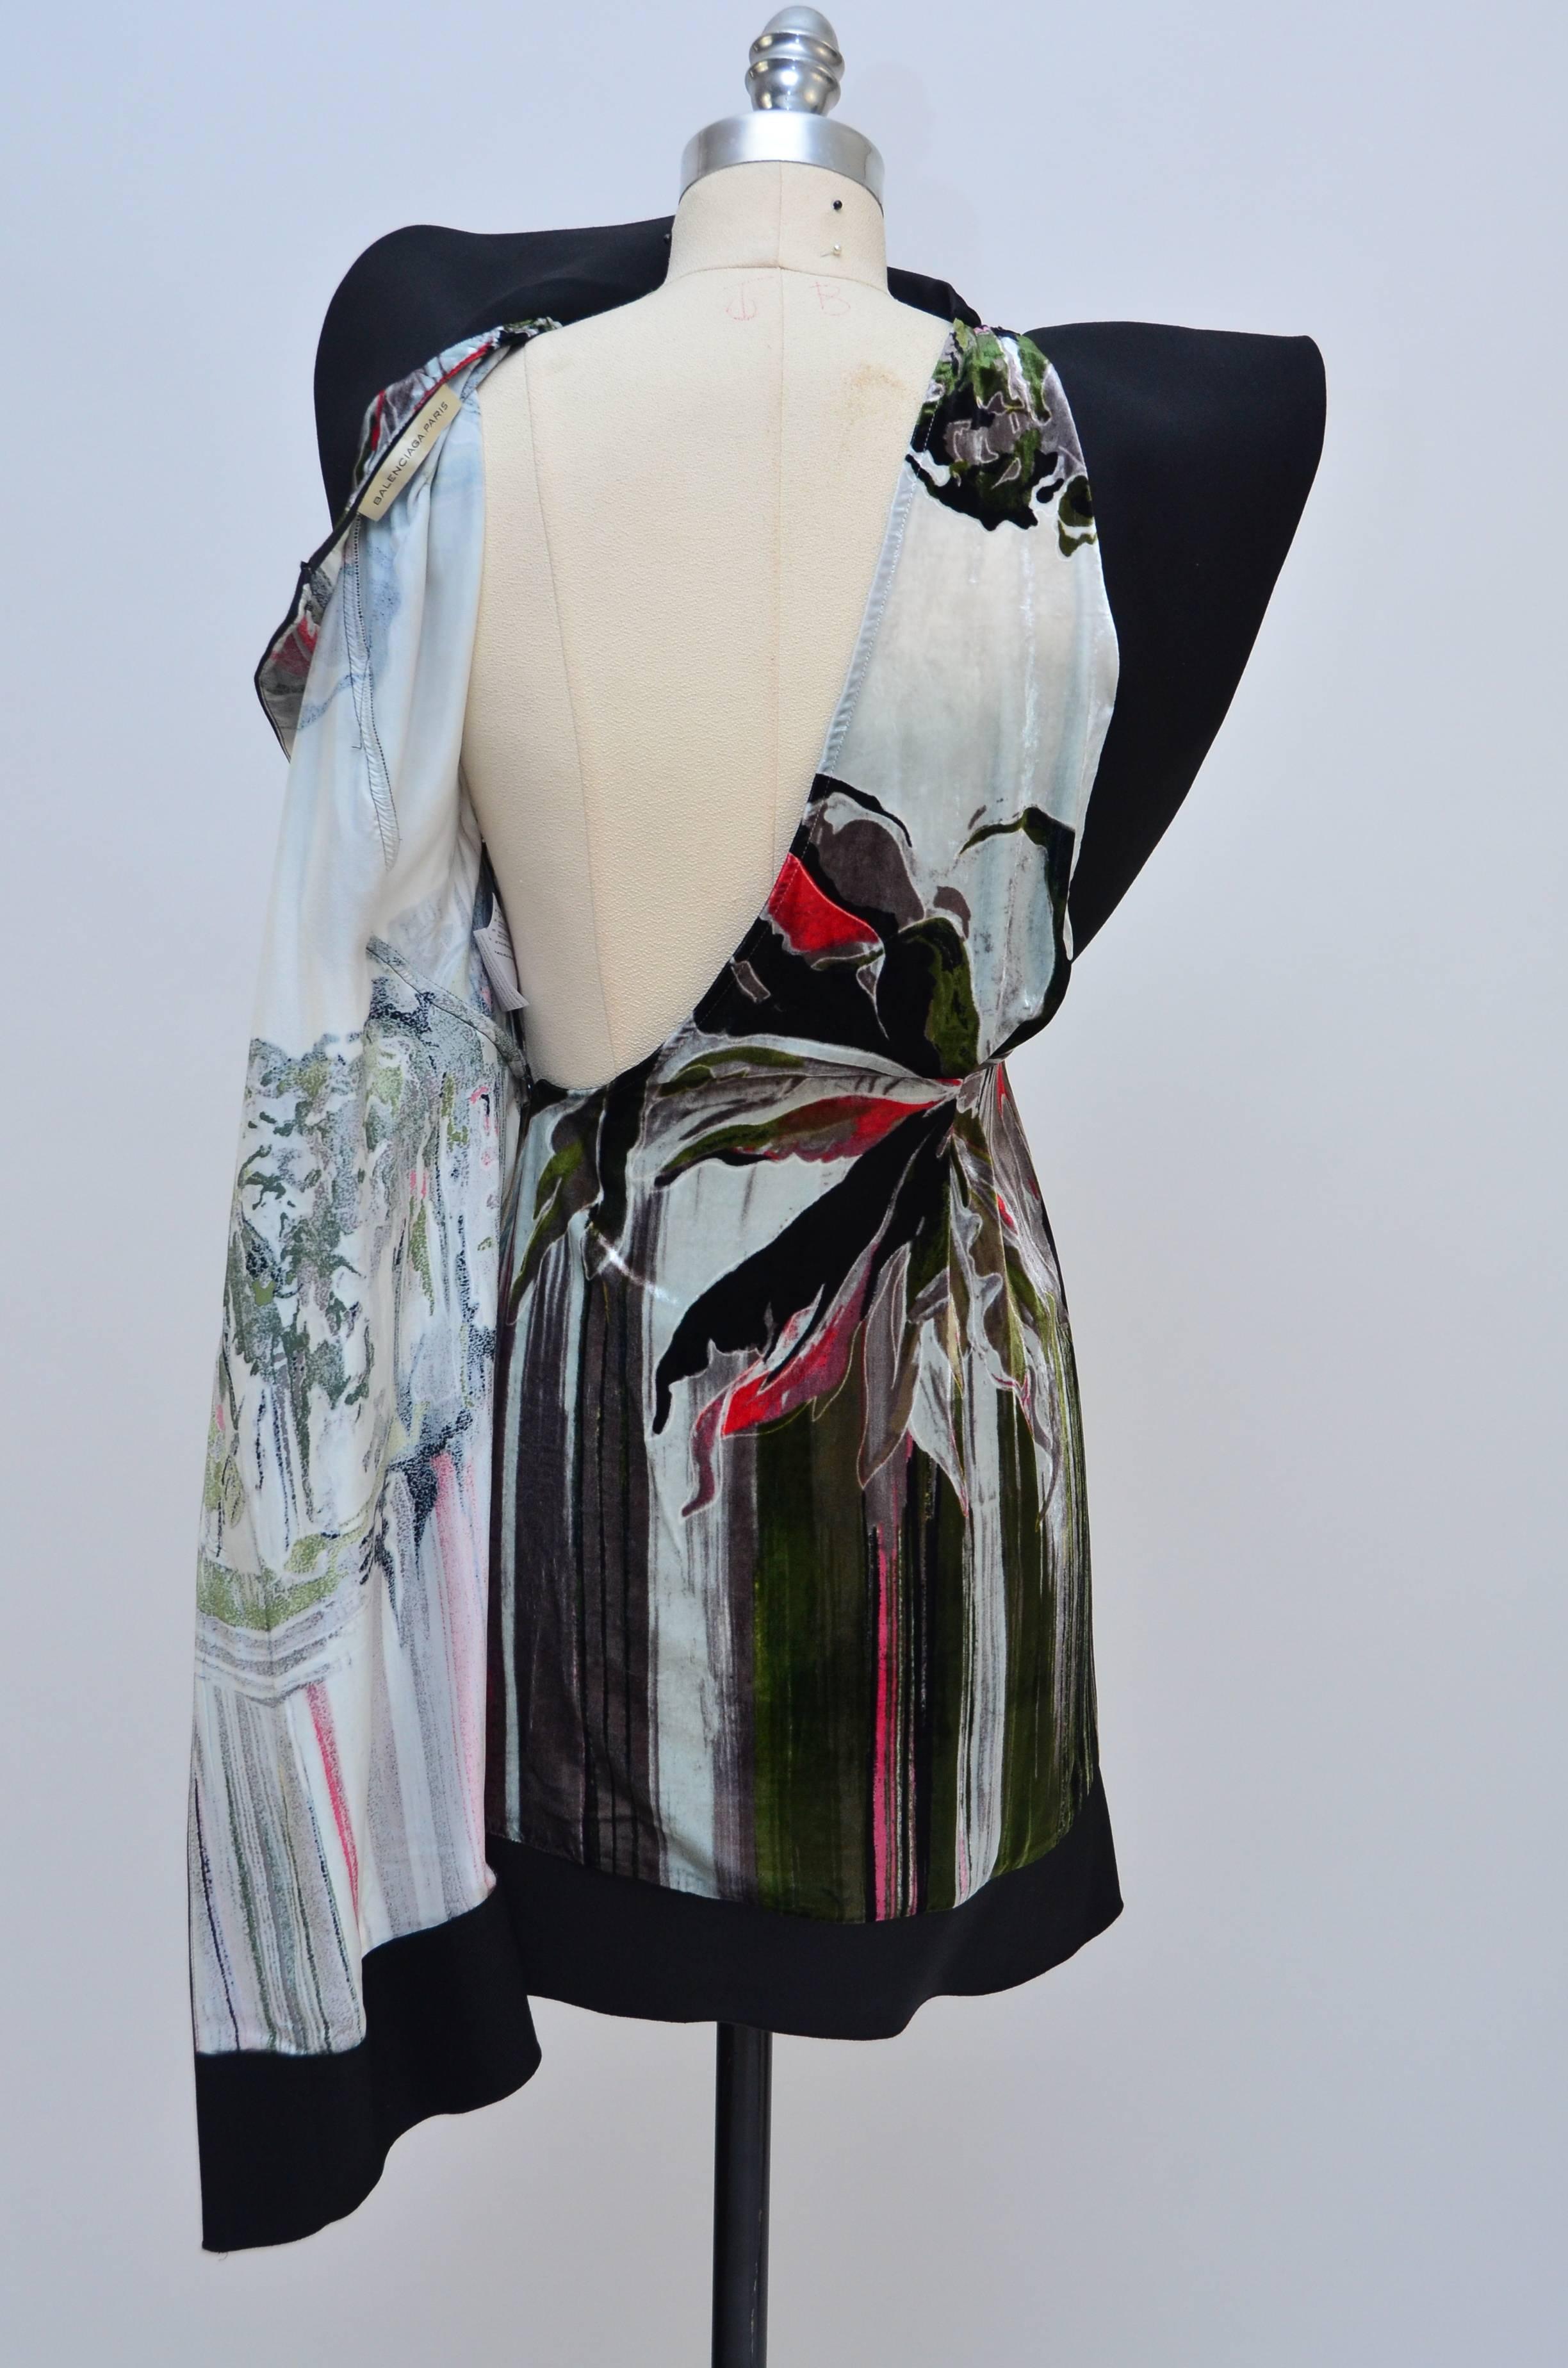 Balenciaga  Nicolas Ghesquière  Runway 2010 Silk Ikat Print Dress  36 In Excellent Condition For Sale In New York, NY